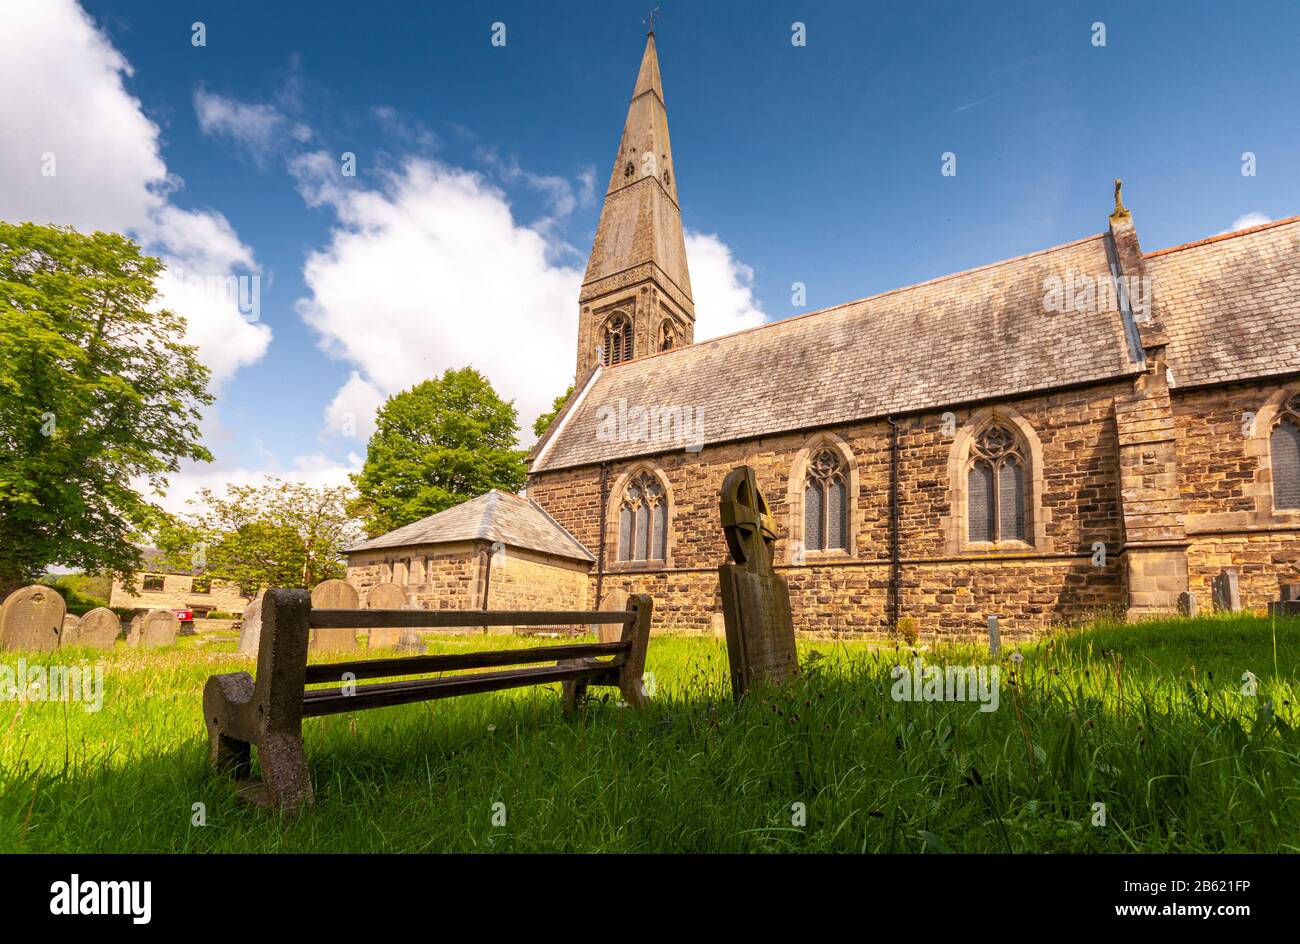 Bamford, England, UK - May 19, 2011: Sun shines on the spire and graveyard of St John's Church in Bamford in the English Peak District. Stock Photo